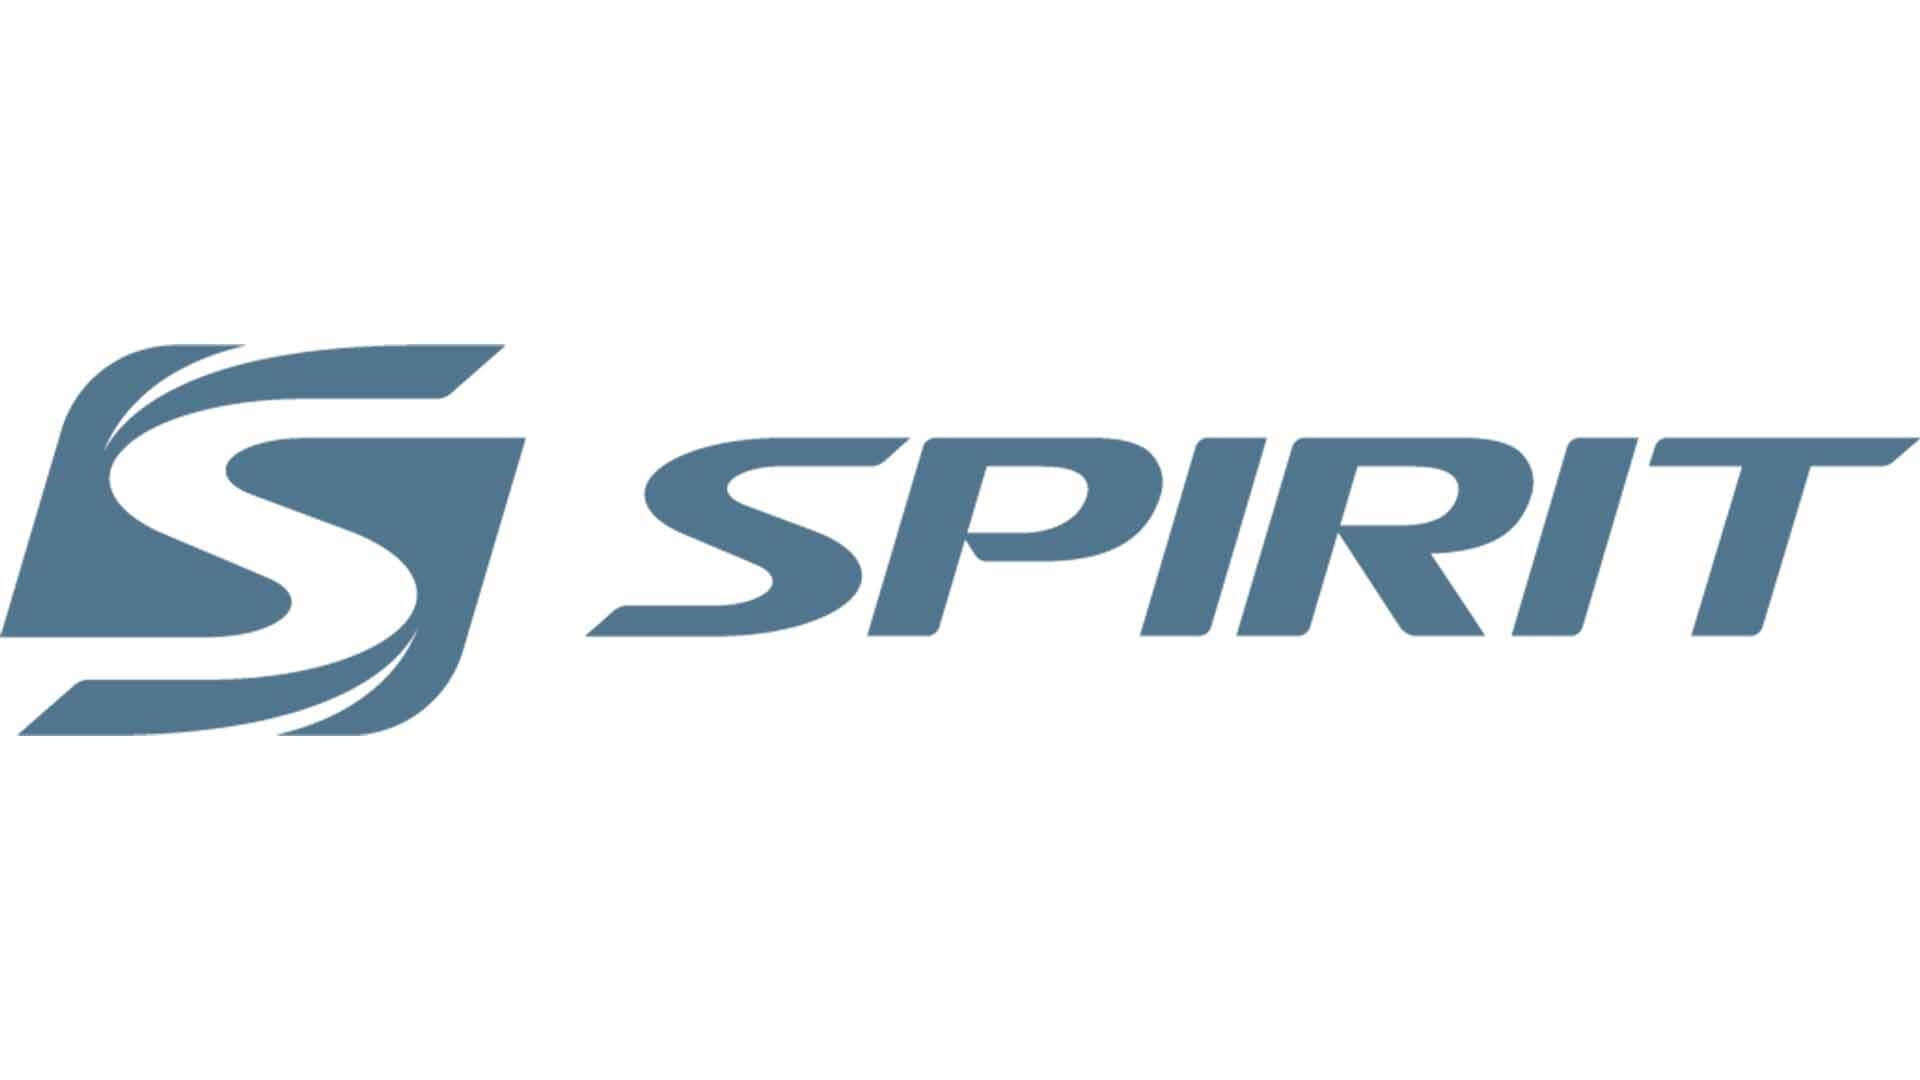 A logo of spirit airlines